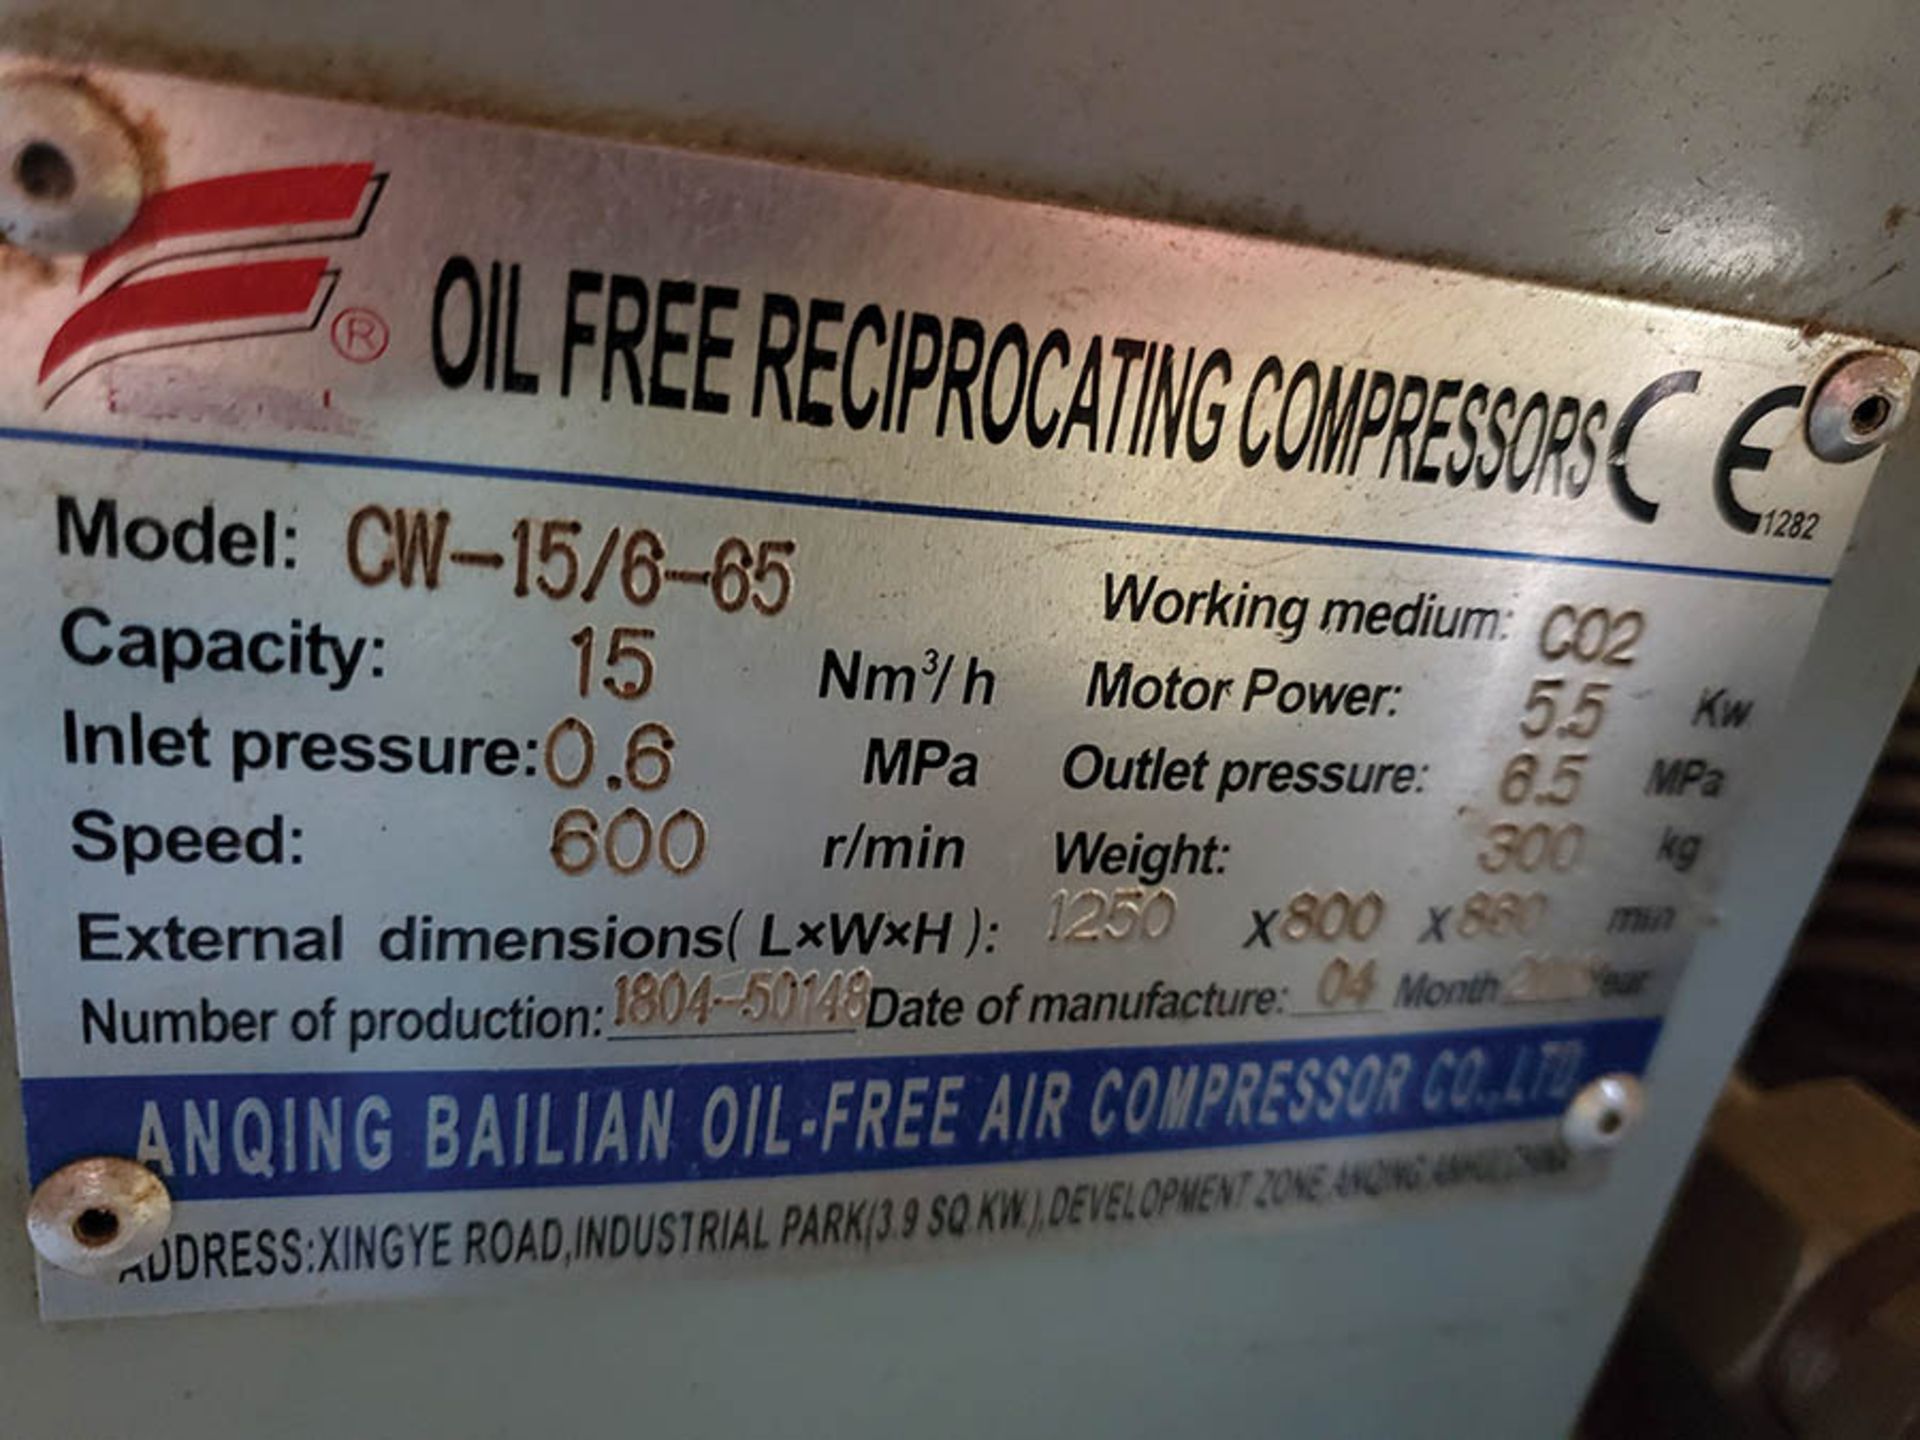 ANQING BAILIAN OIL-FREE AIR COMPRESSOR ON STEEL FRAME, MODEL CW-15/6-65, 600 R/PM, 15 NM3/H CAP. 5.5 - Image 5 of 7